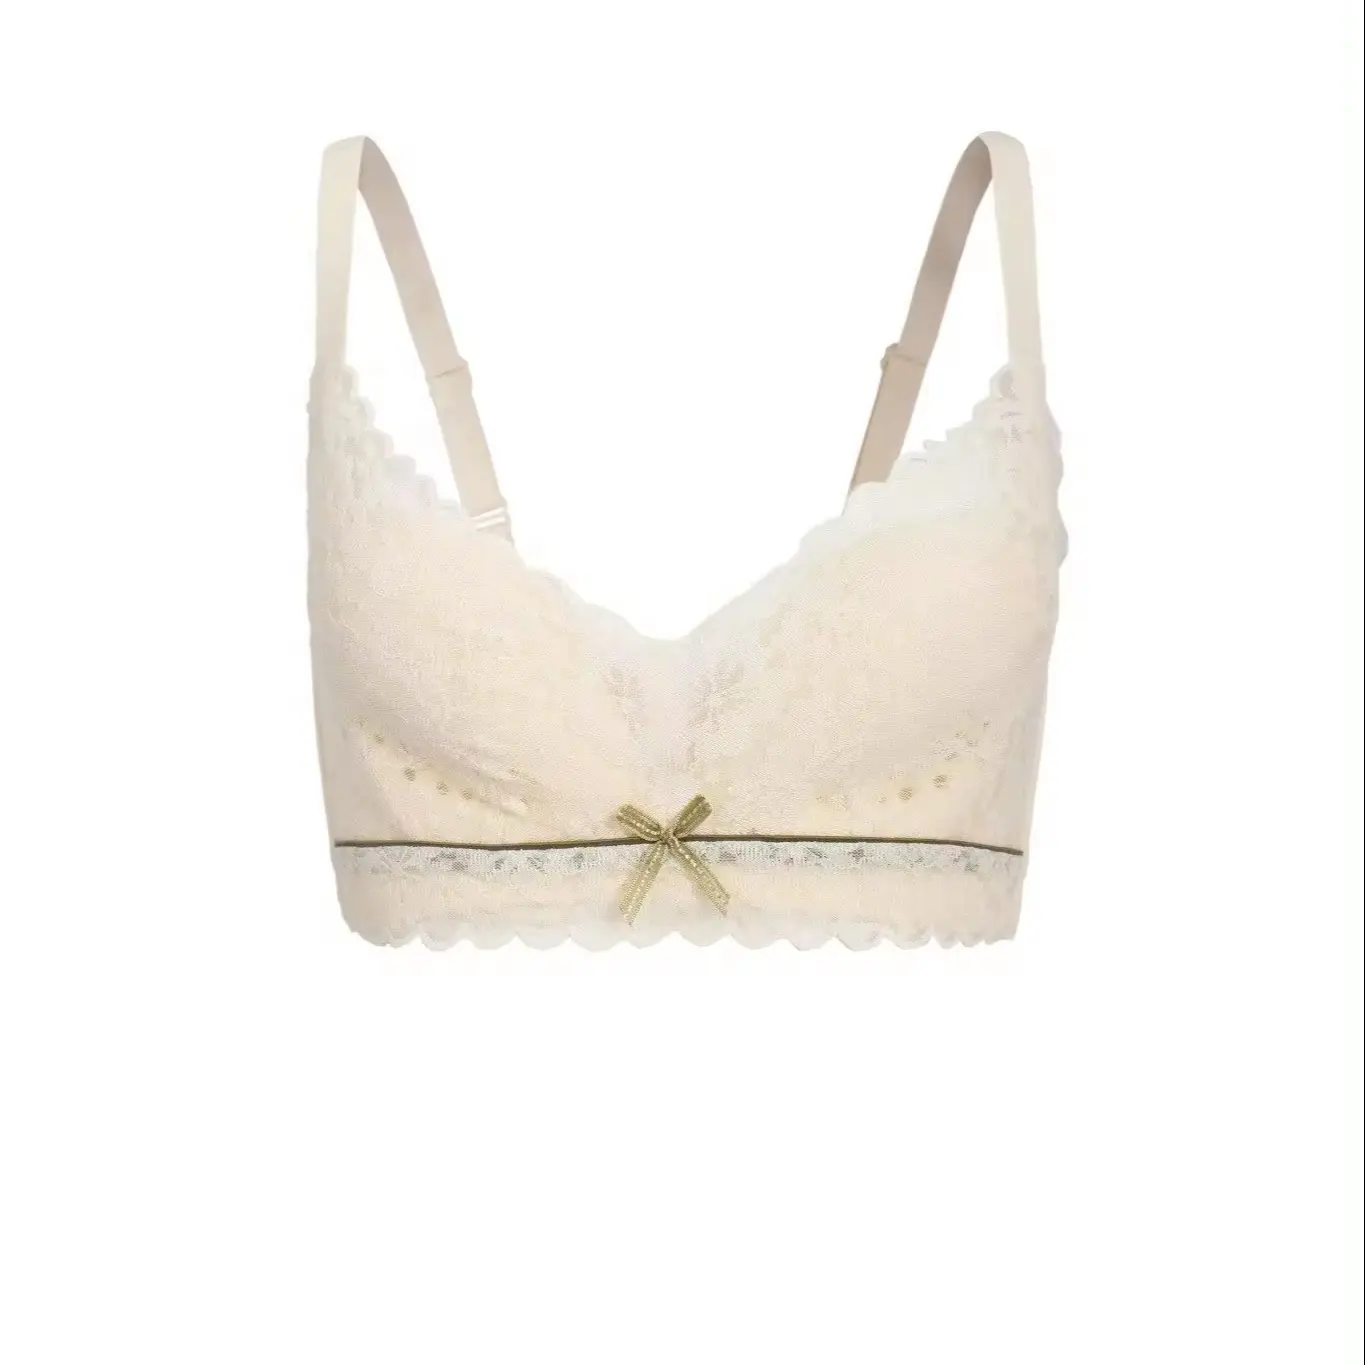 High-quality Bras Make Women More Feminine And Elegant With Comfortable Elastic Lace Material To Caress For An Attractive Bust